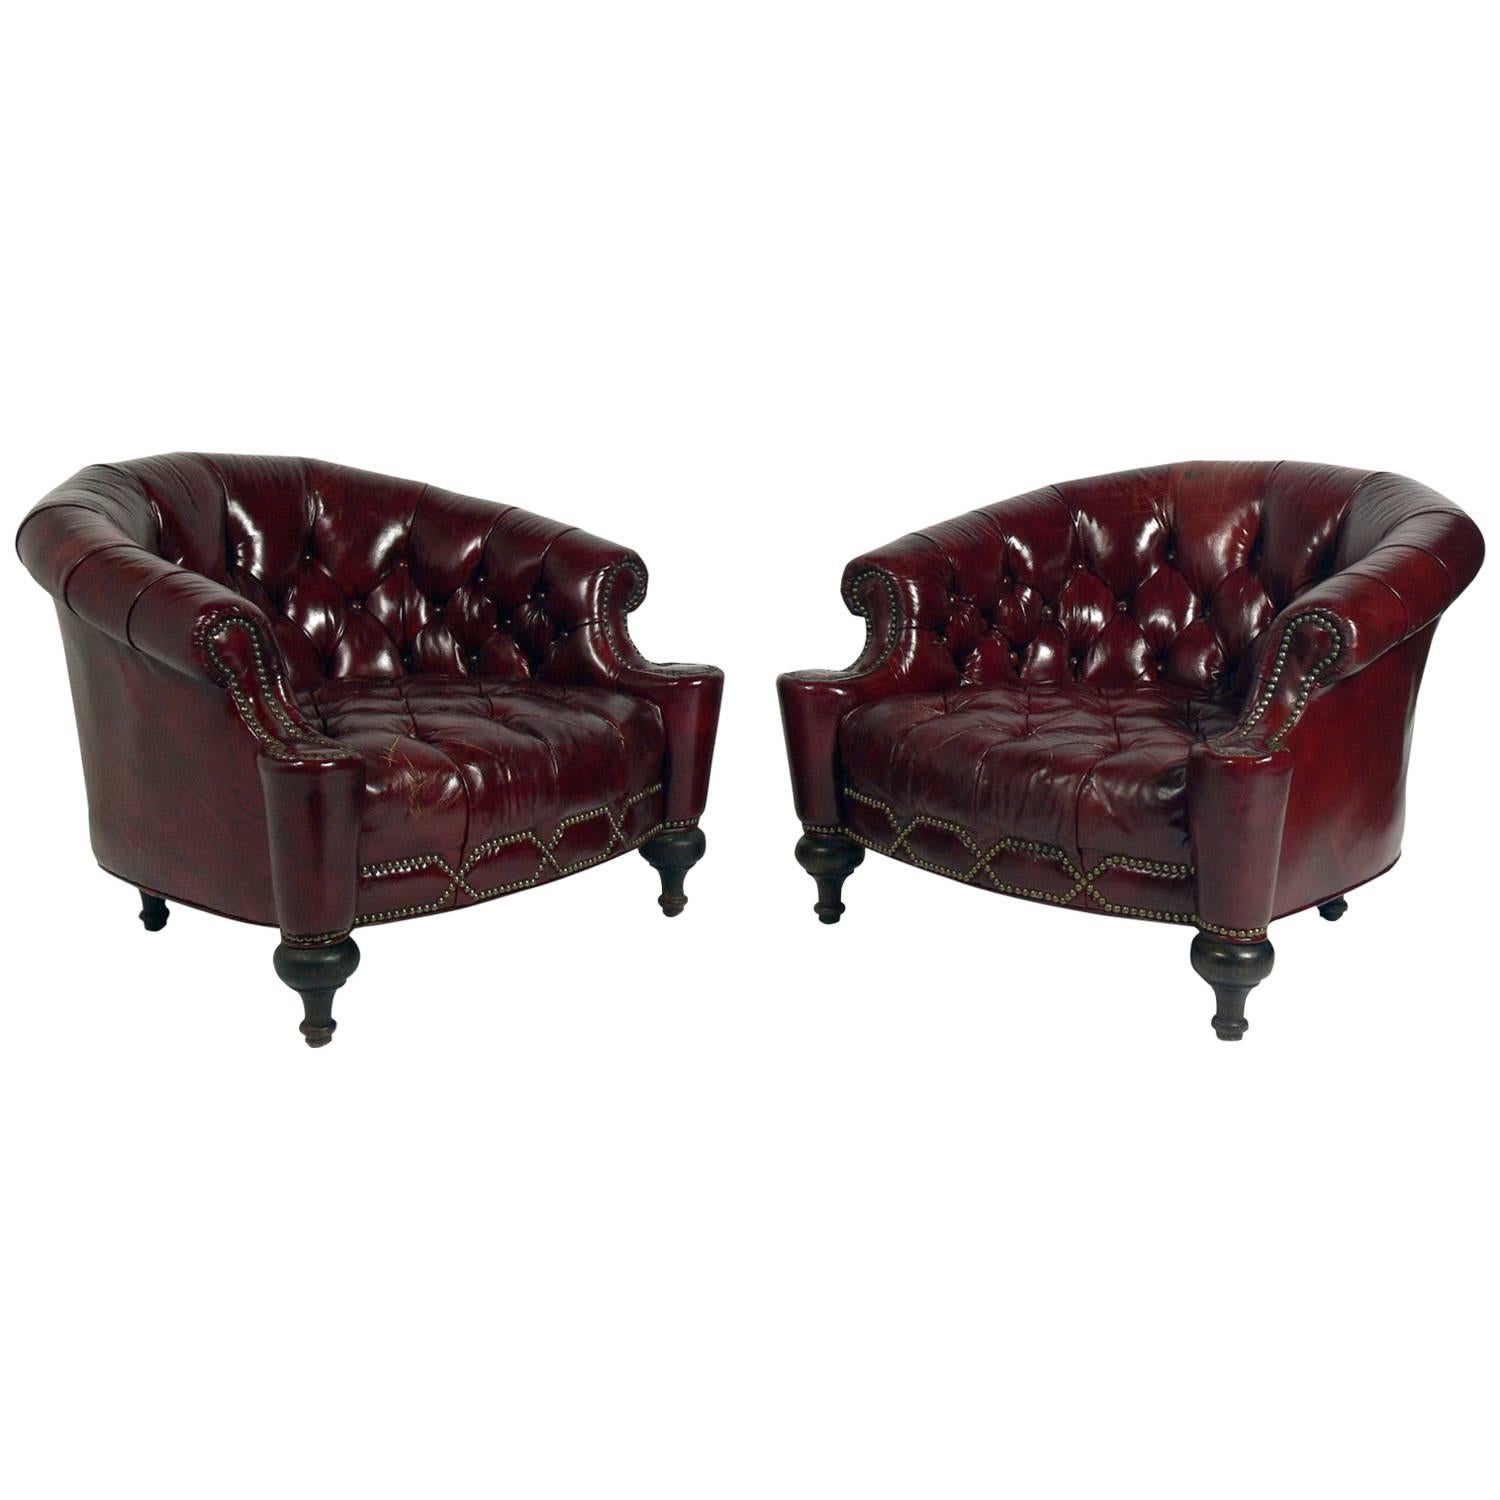 Pair of Tufted Oxblood Red Leather Club Chairs 